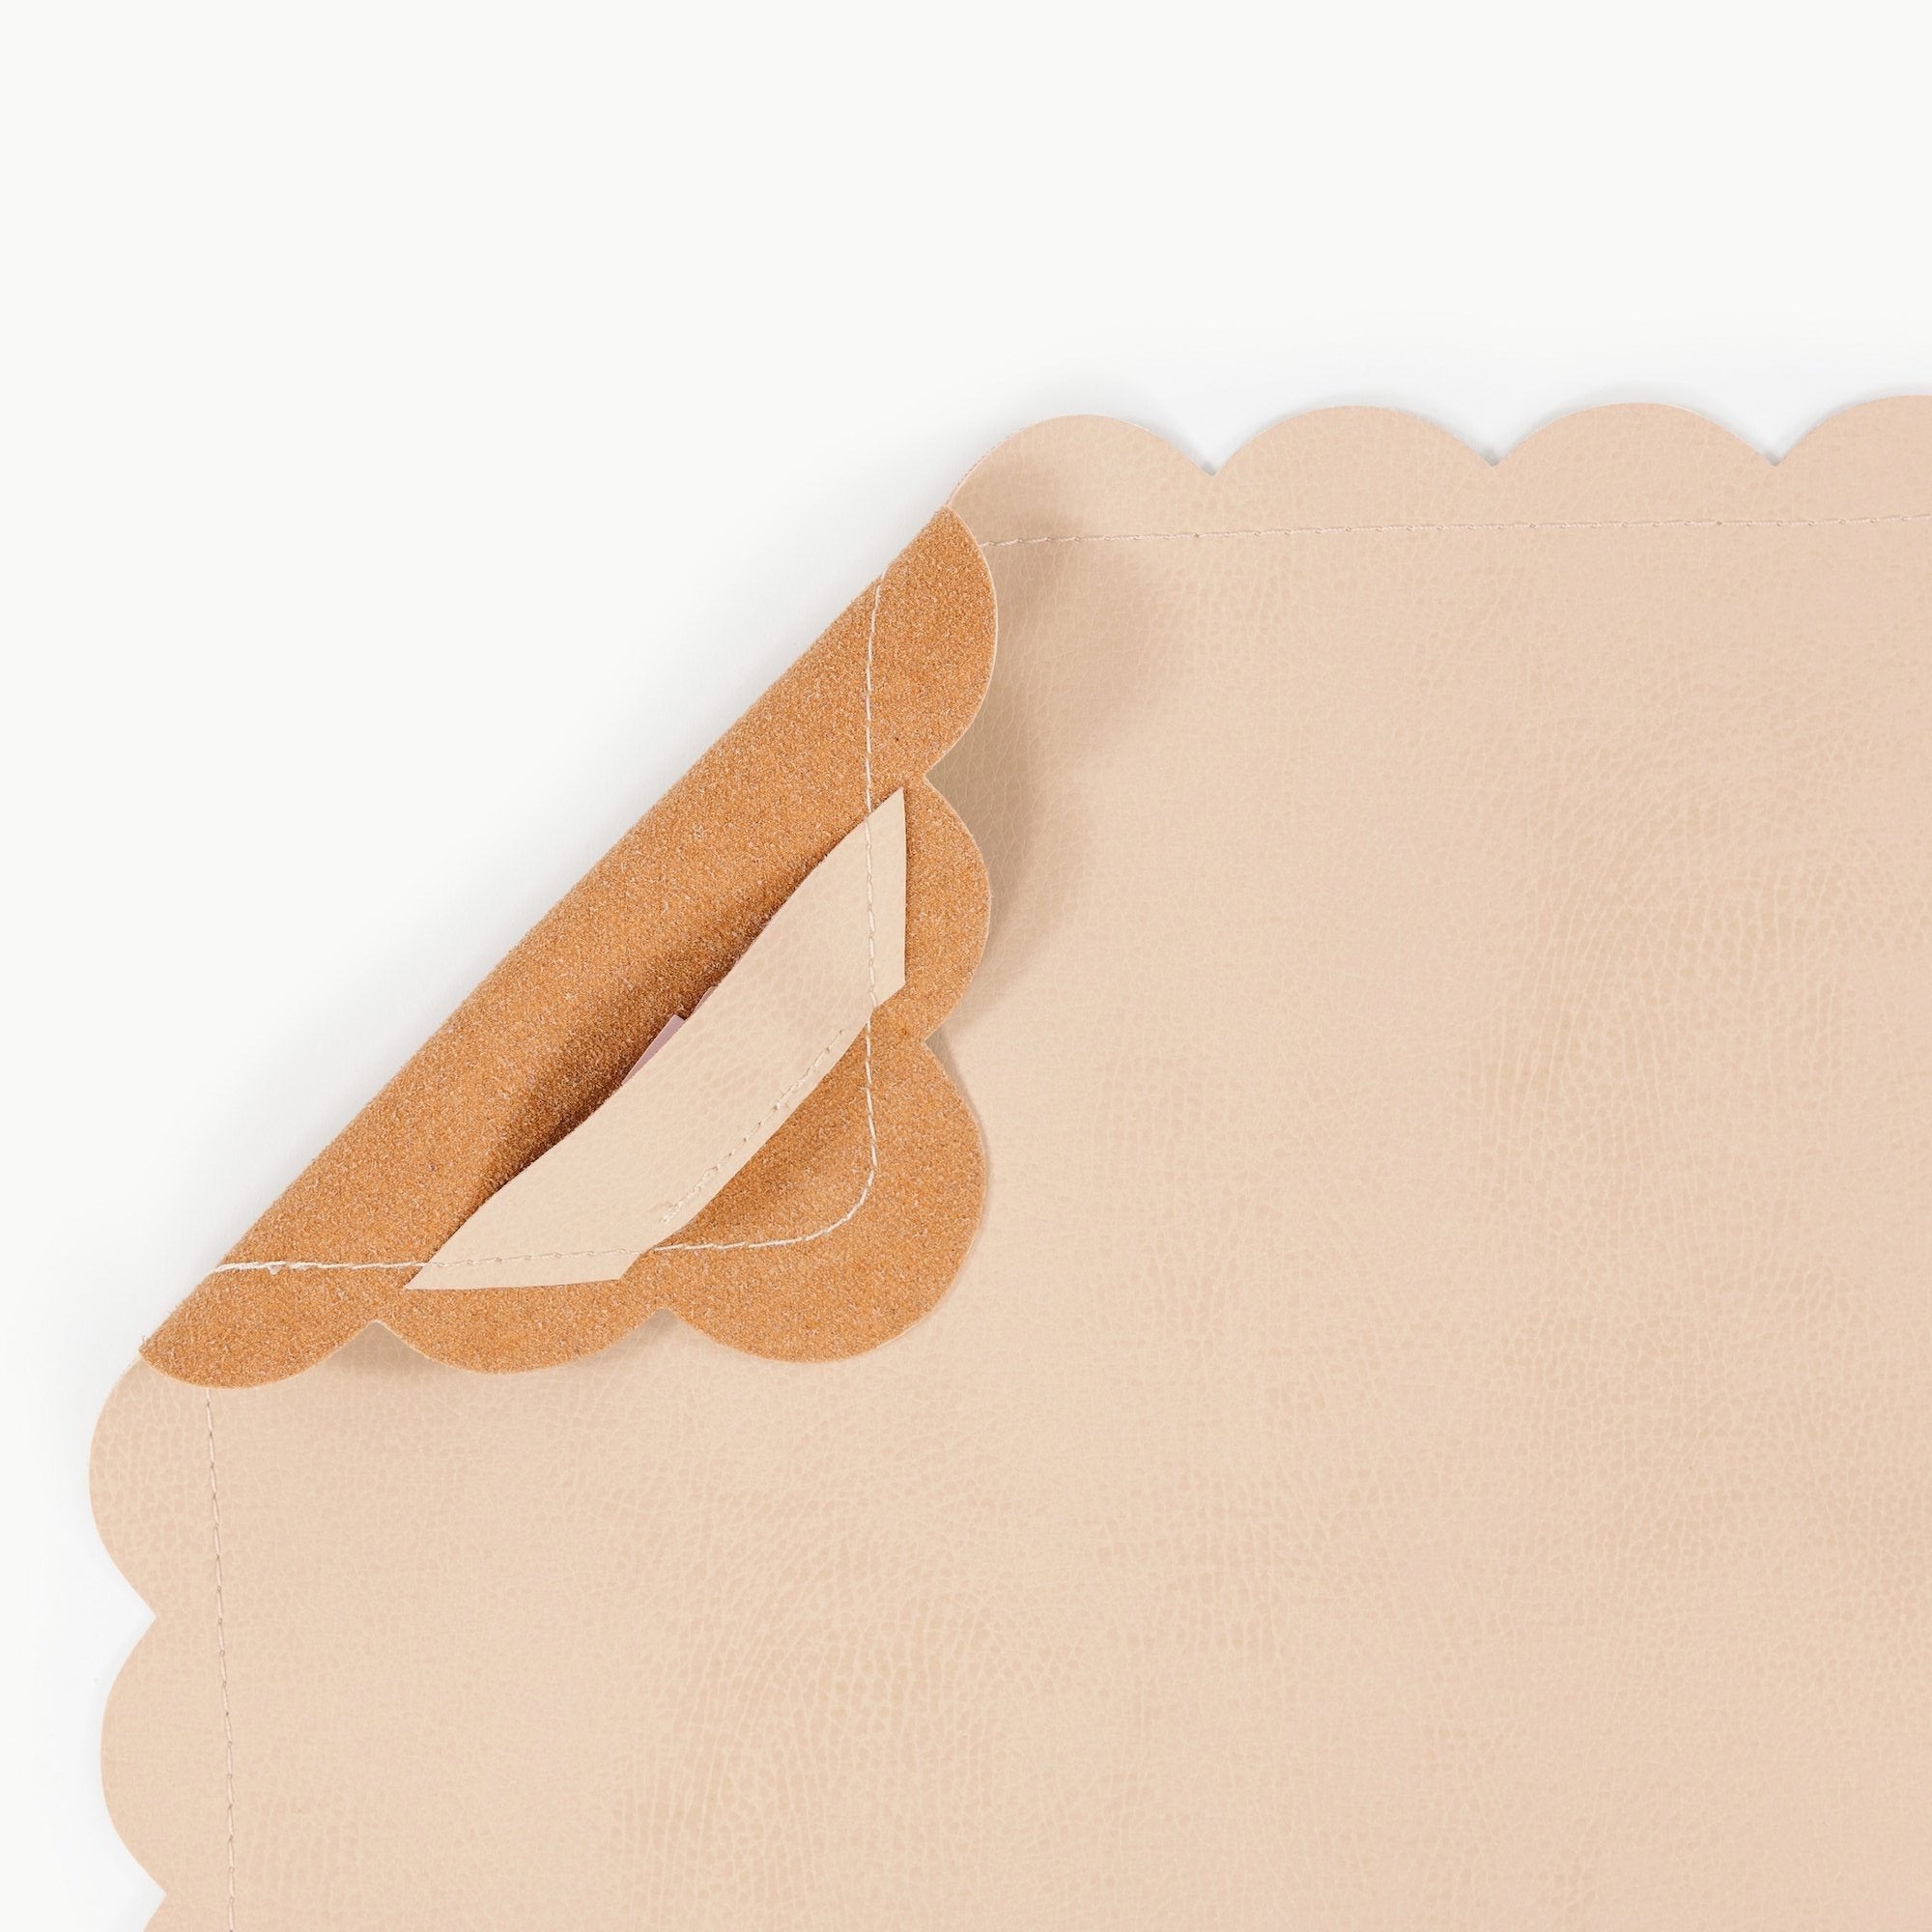 Untanned Scallop@Hanging tab detail on the Untanned Scallop Micro mat 